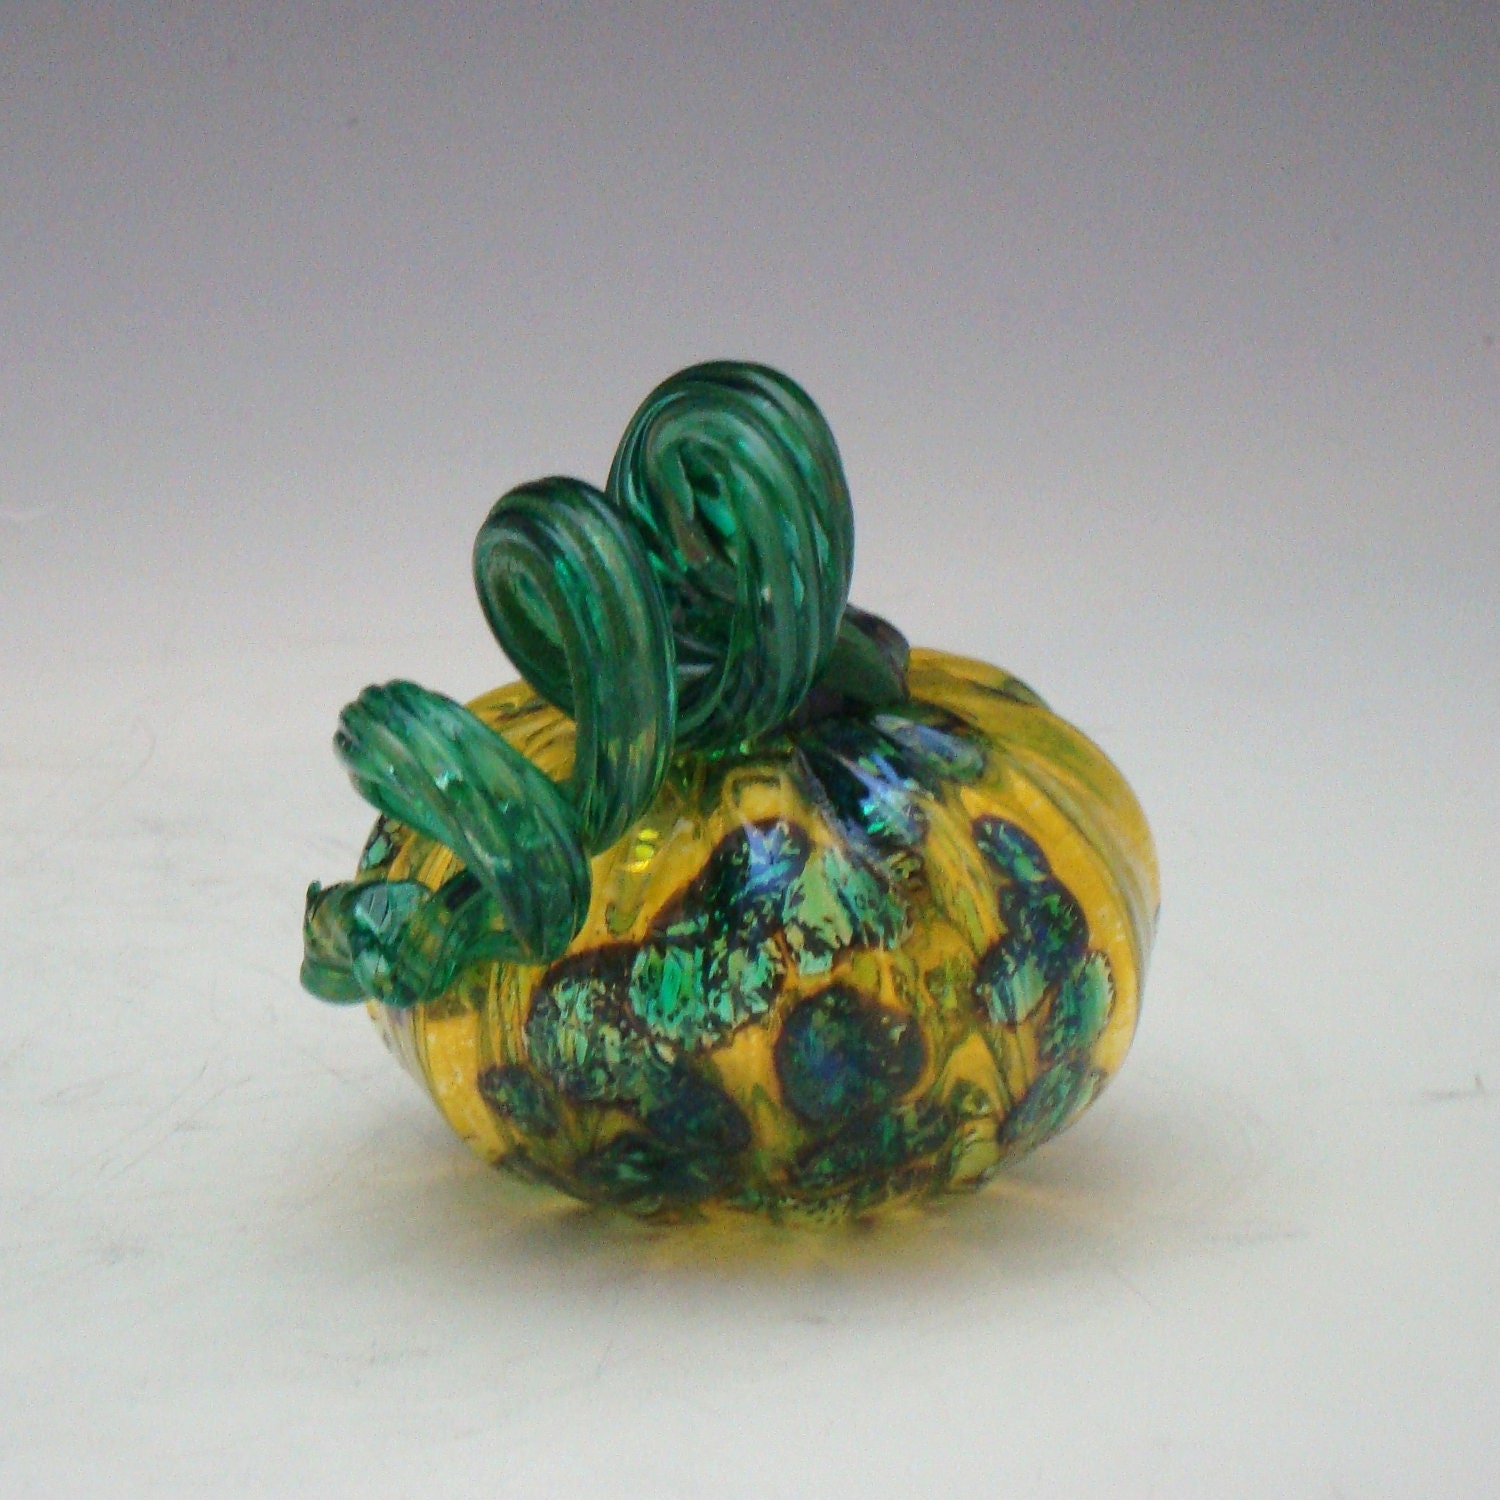 NW Hand-blown 'Mini' glass pumpkins by DBRGlassworks on Etsy